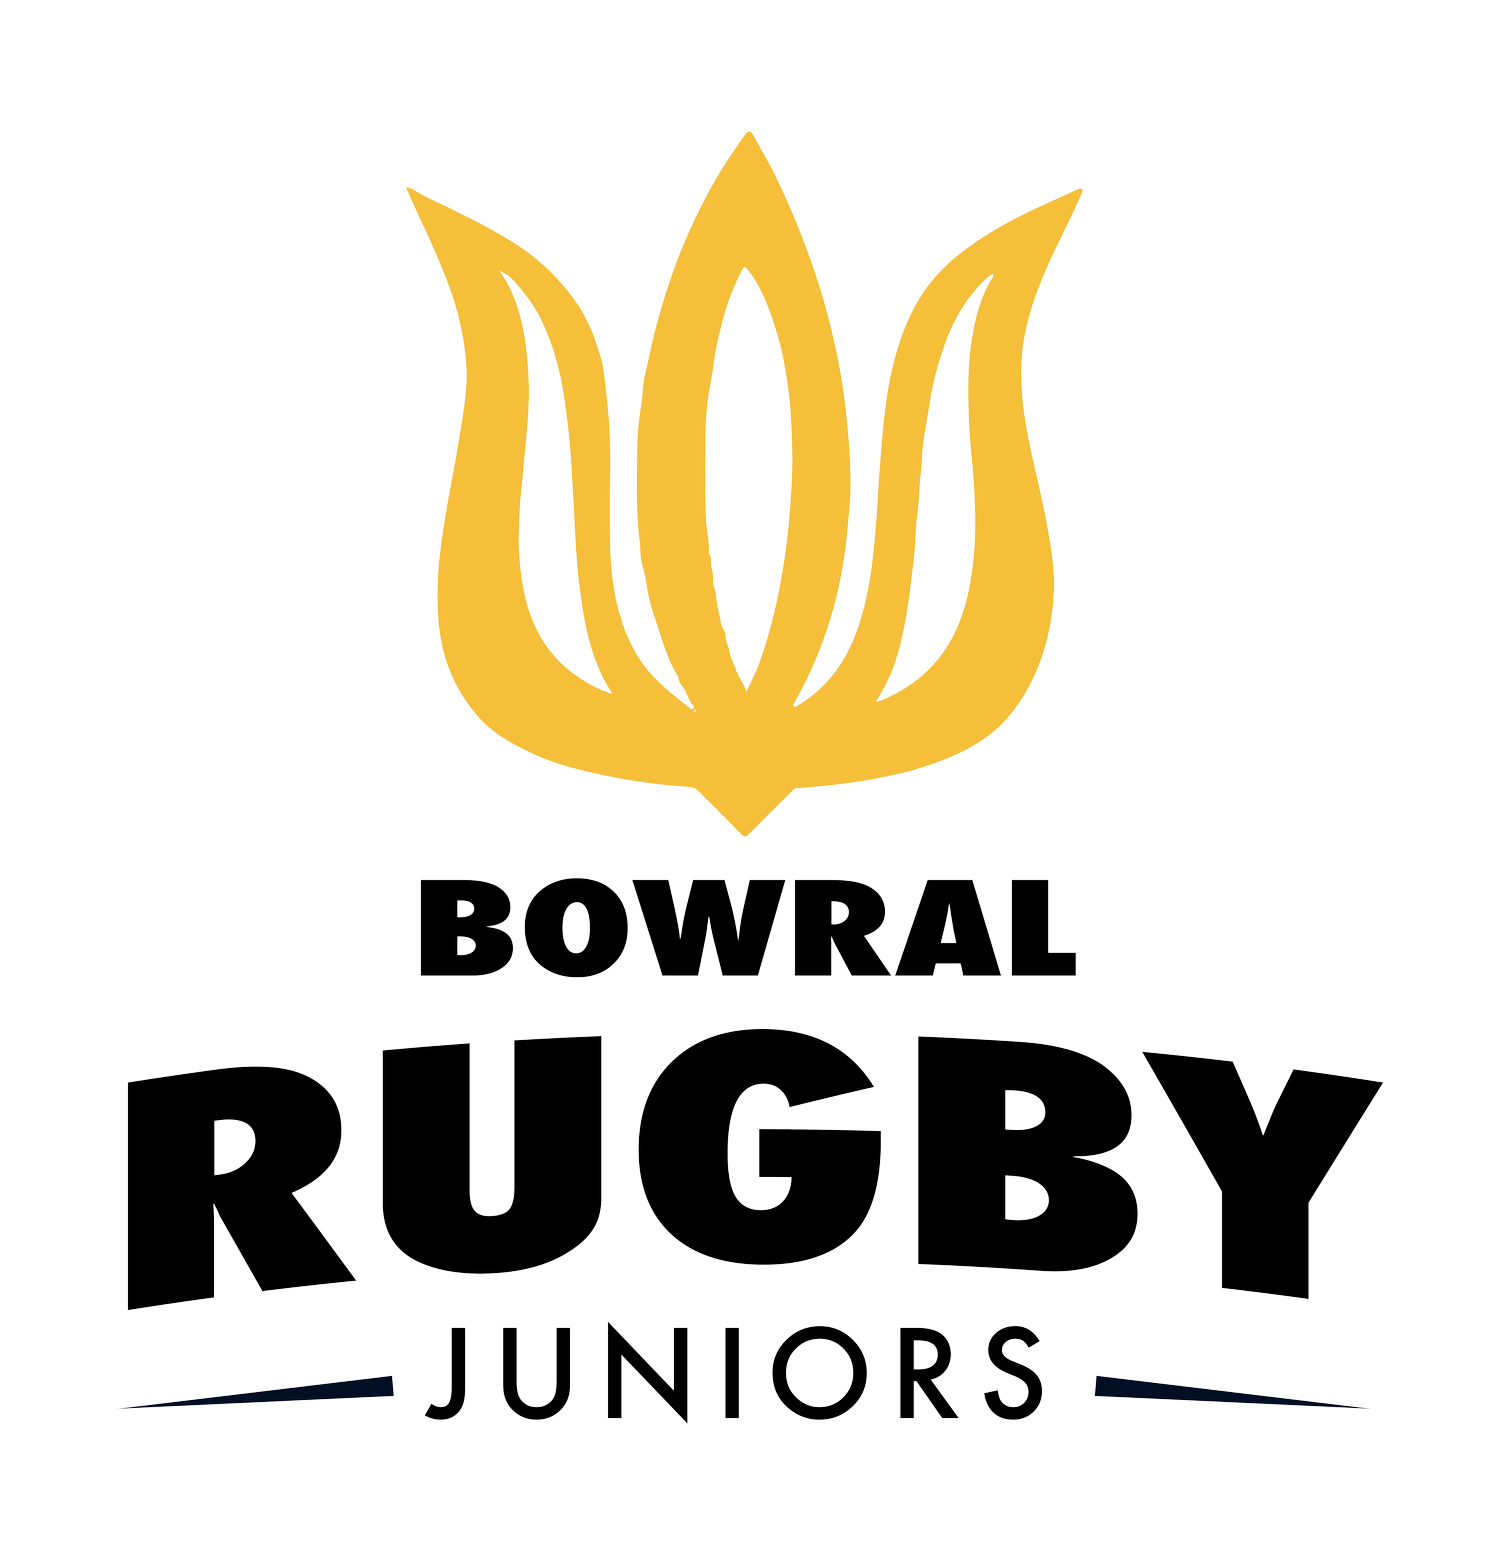 Bowral Rugby Juniors